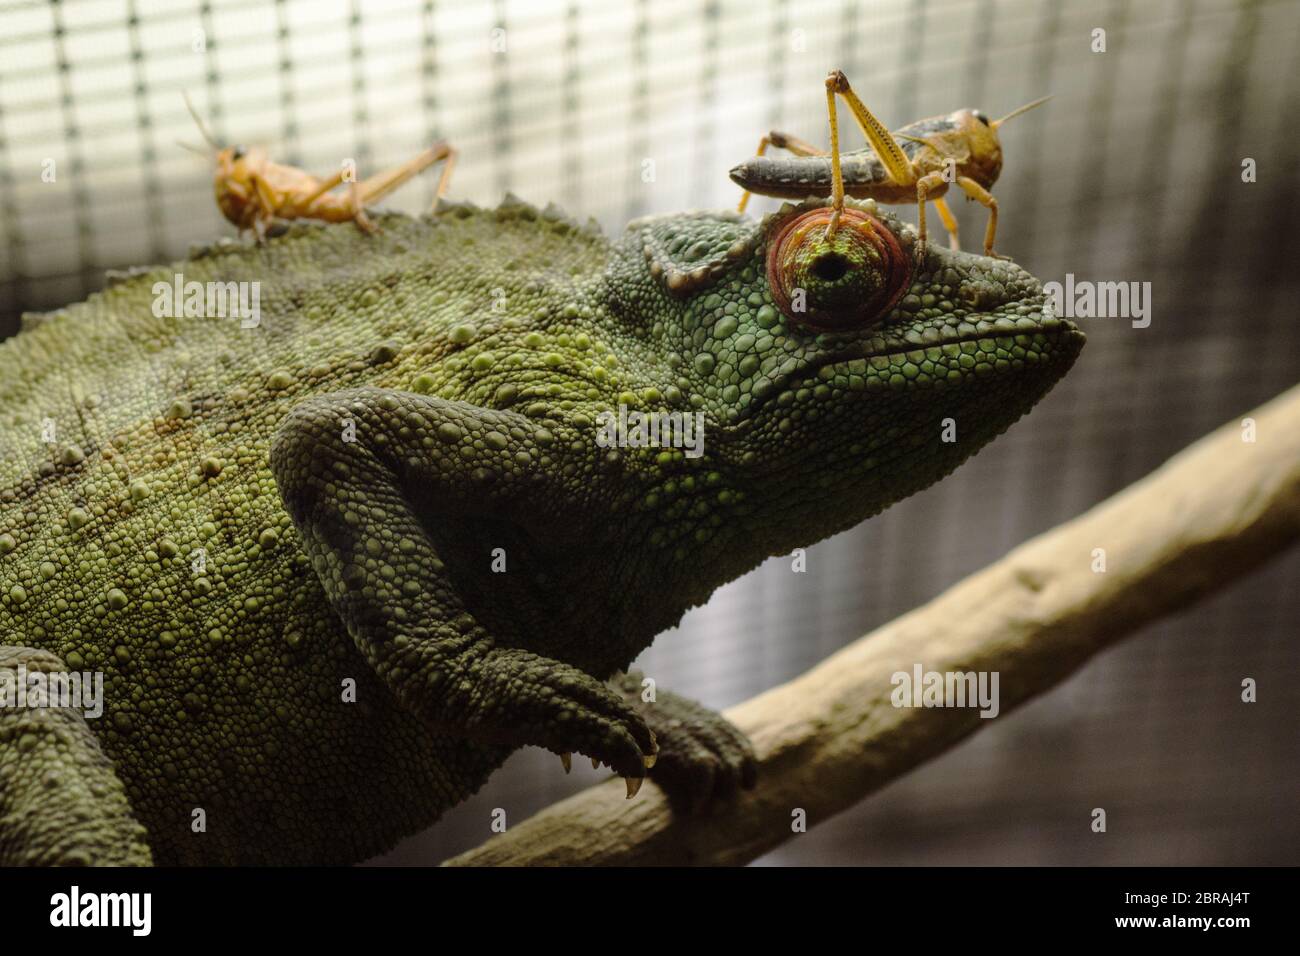 The grasshoppers are standing on green cameleon indoors in cage. Stock Photo